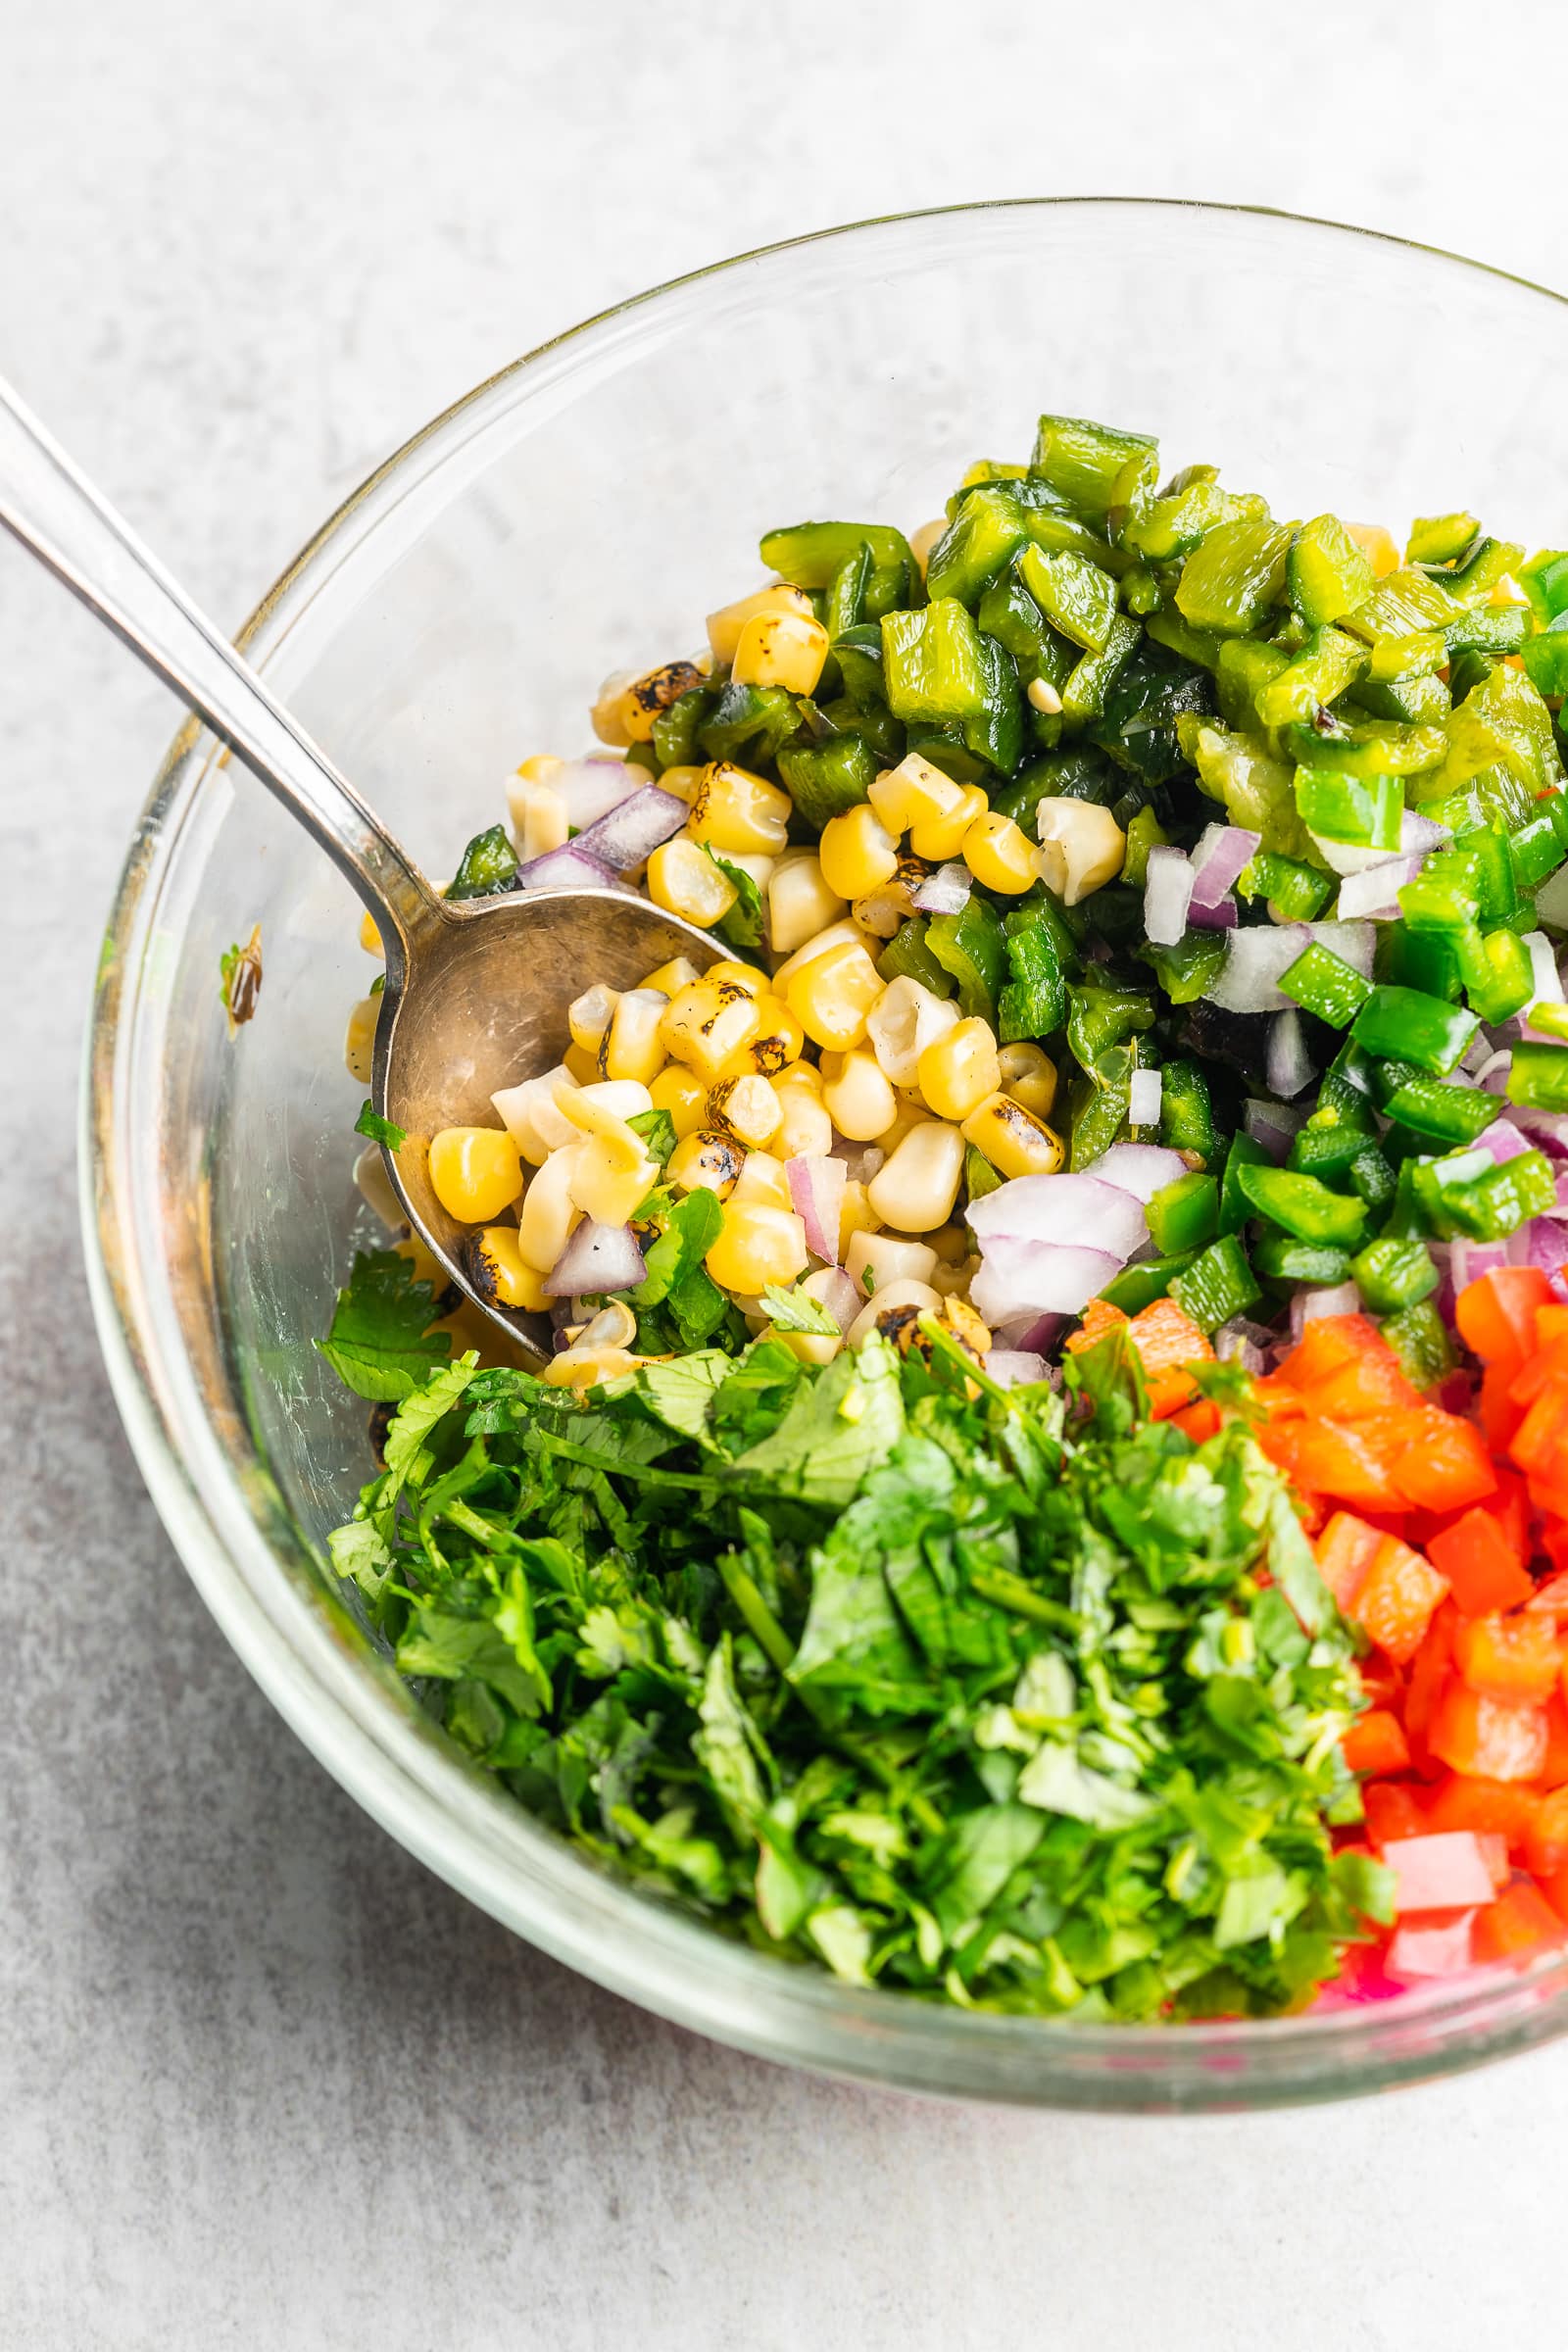 Corn salsa ingredients in a glass bowl.